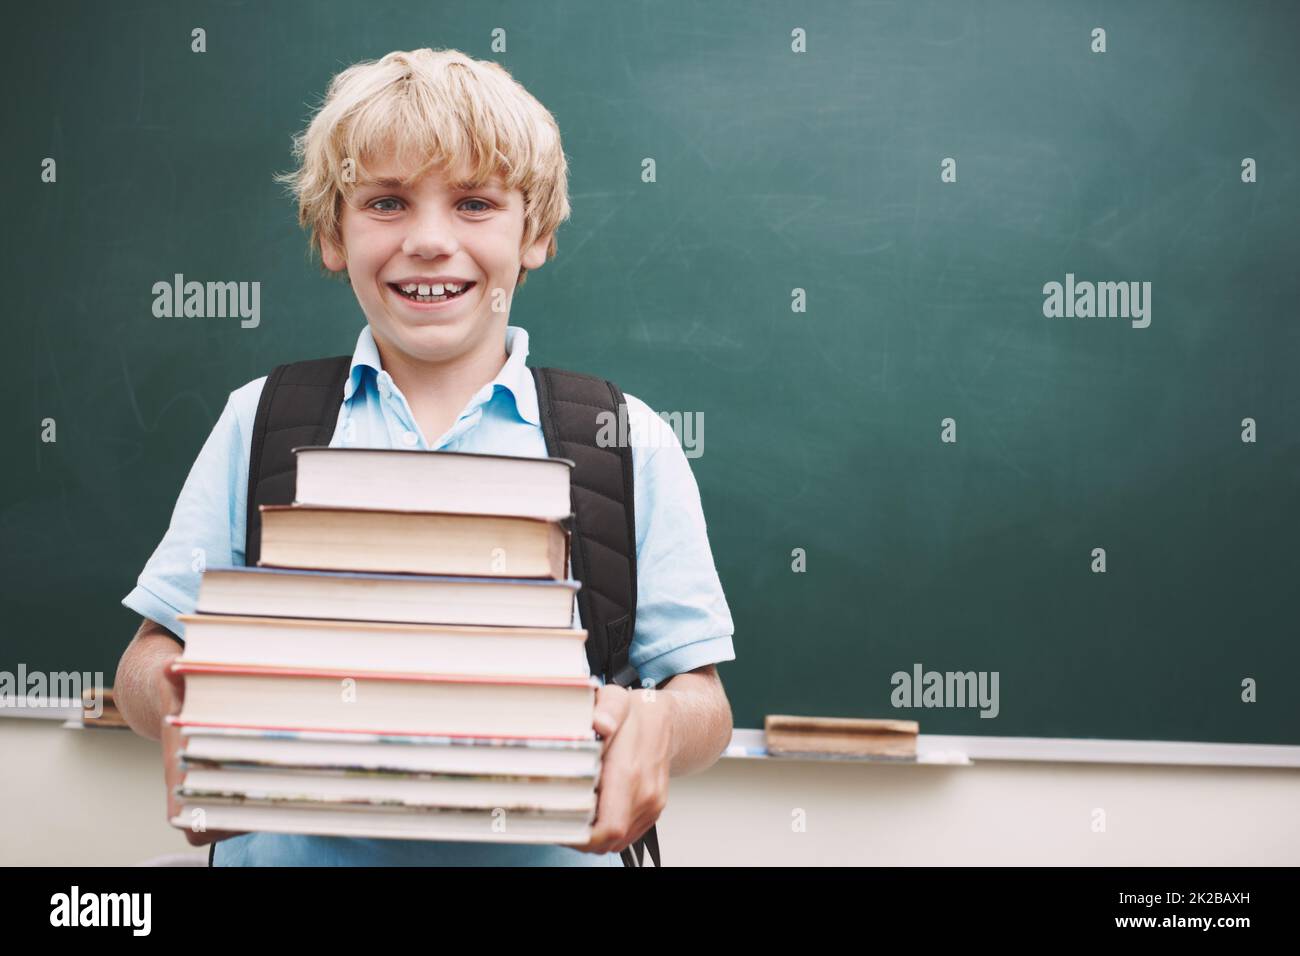 I want to pack my brain as full as possible. A cute young boy carrying a stack of books against a blackboard in the classroom. Stock Photo